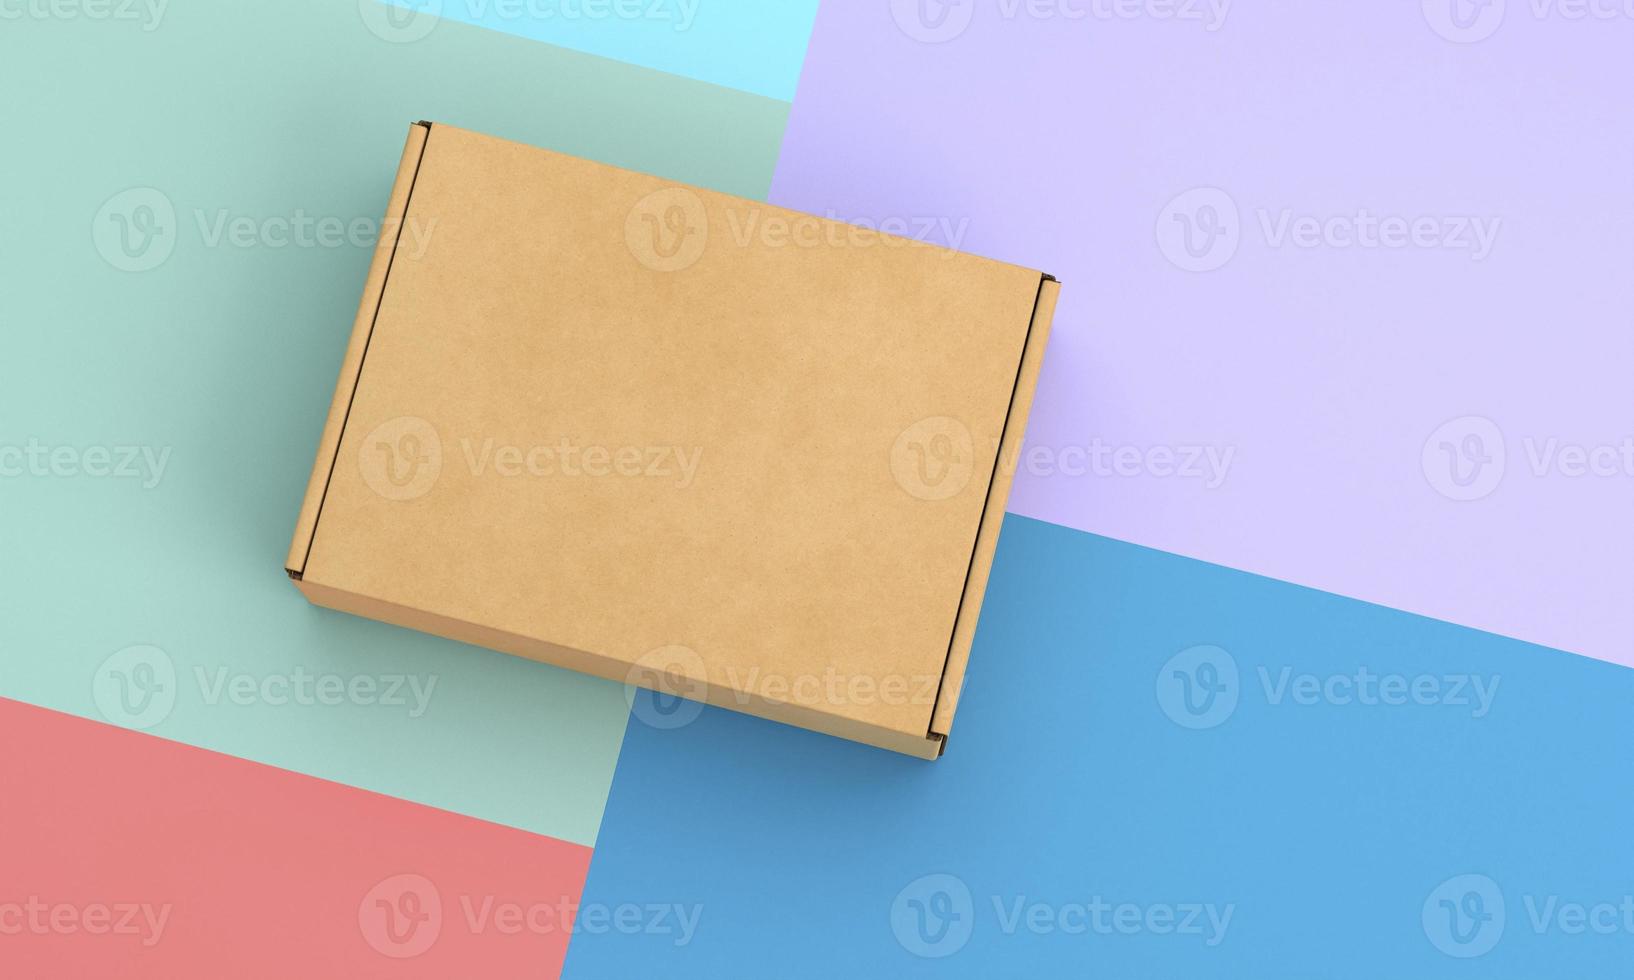 Contrasted background with a brown cardboard box photo